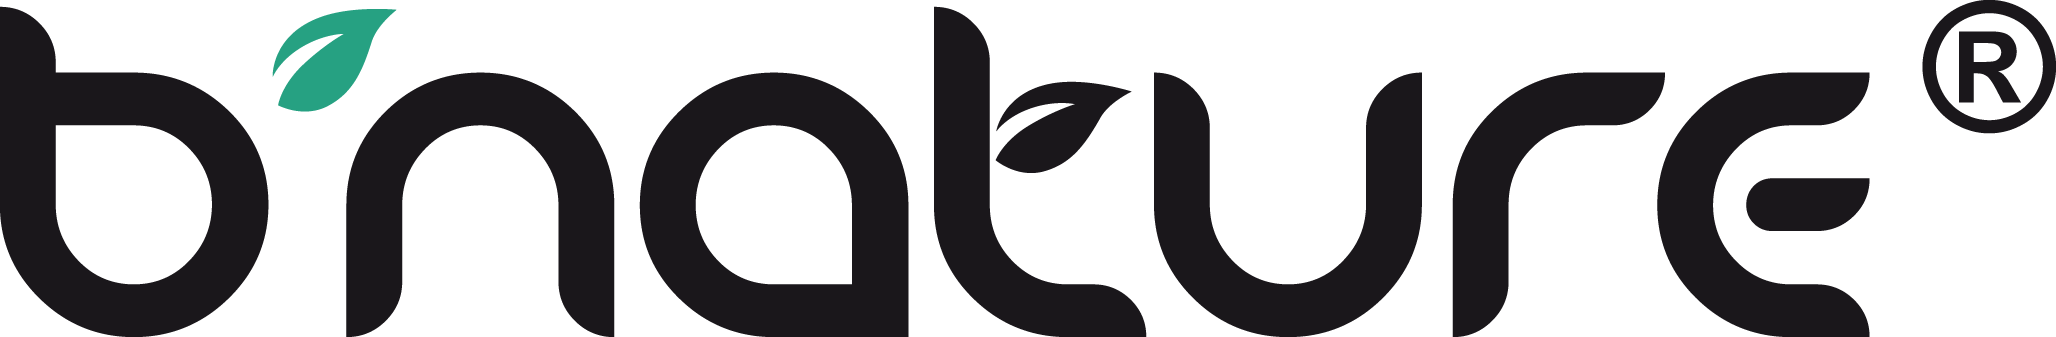 bnature logo_without background.png